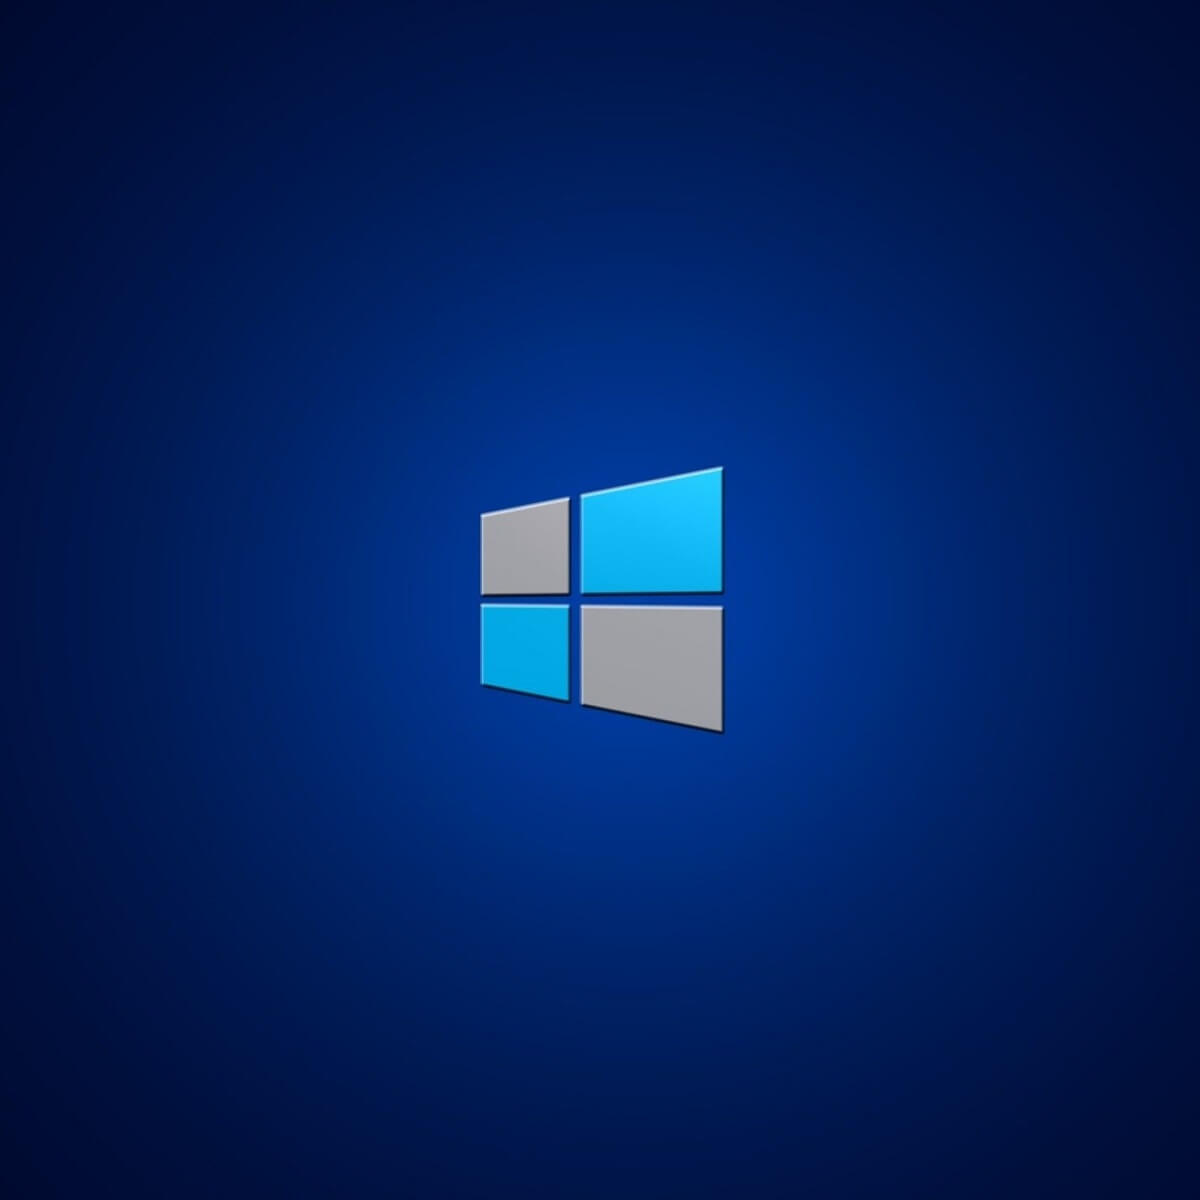 Update KB3198586 for Windows 10 version 1511 improves and fixes ...